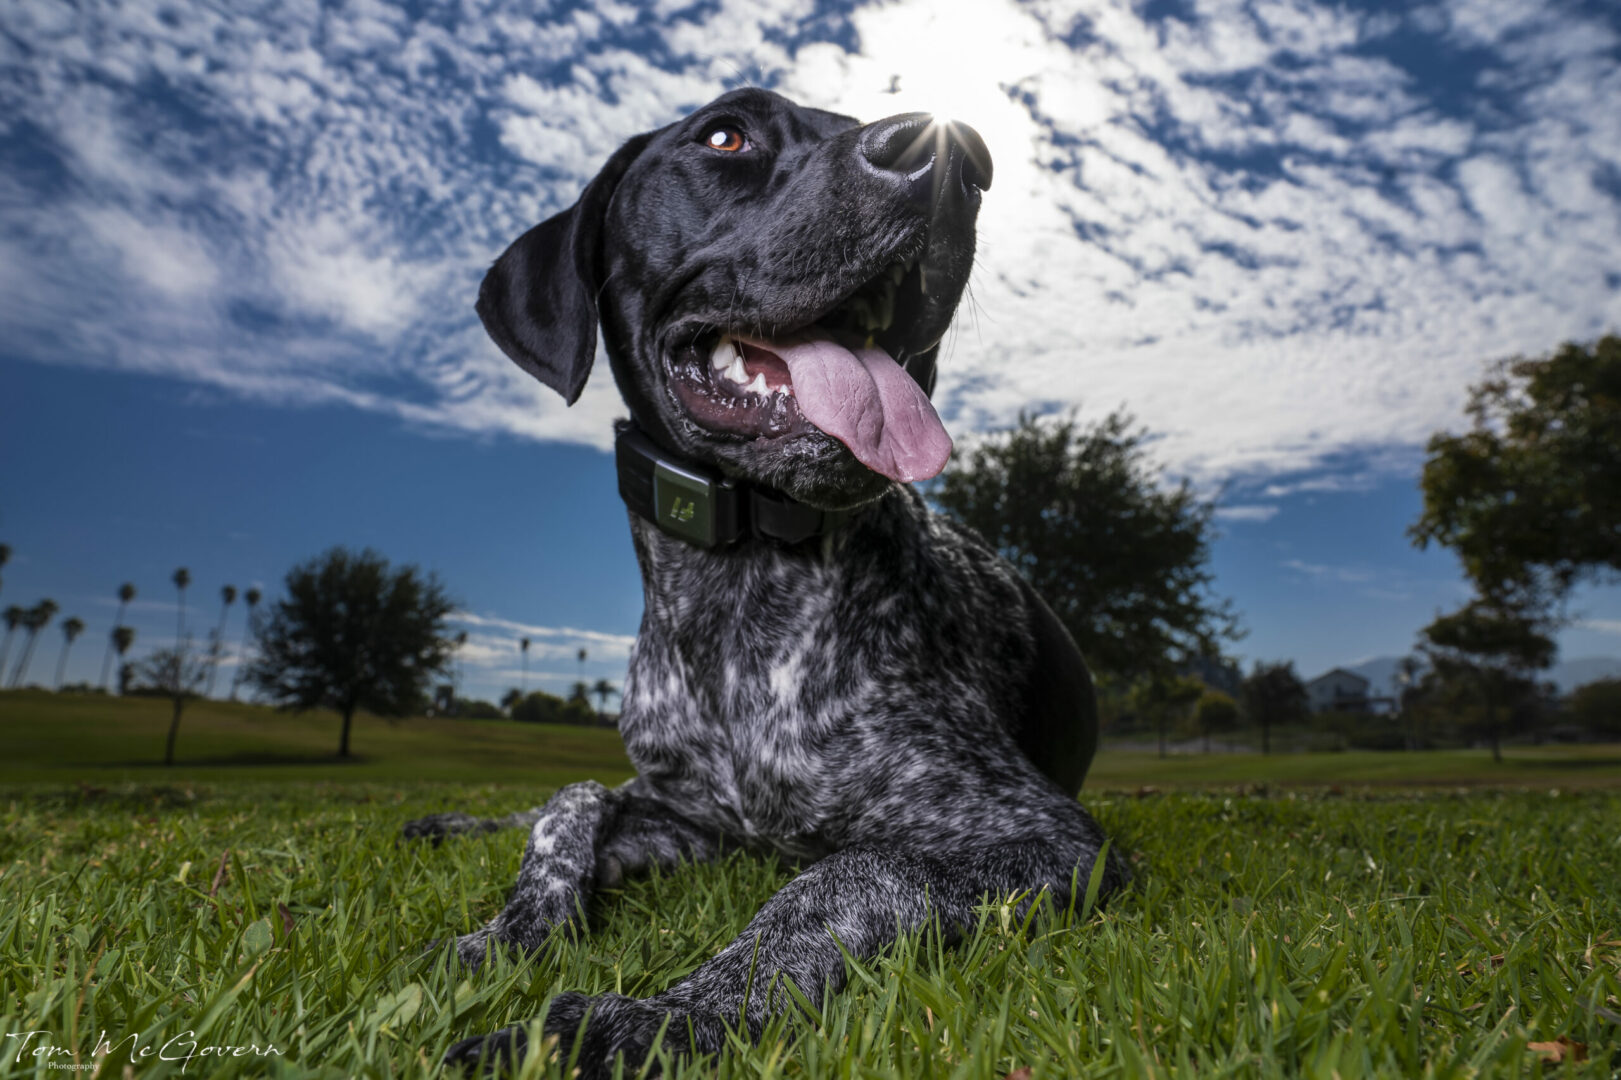 How to Protect Your Dog From Heat Stress in the Summer